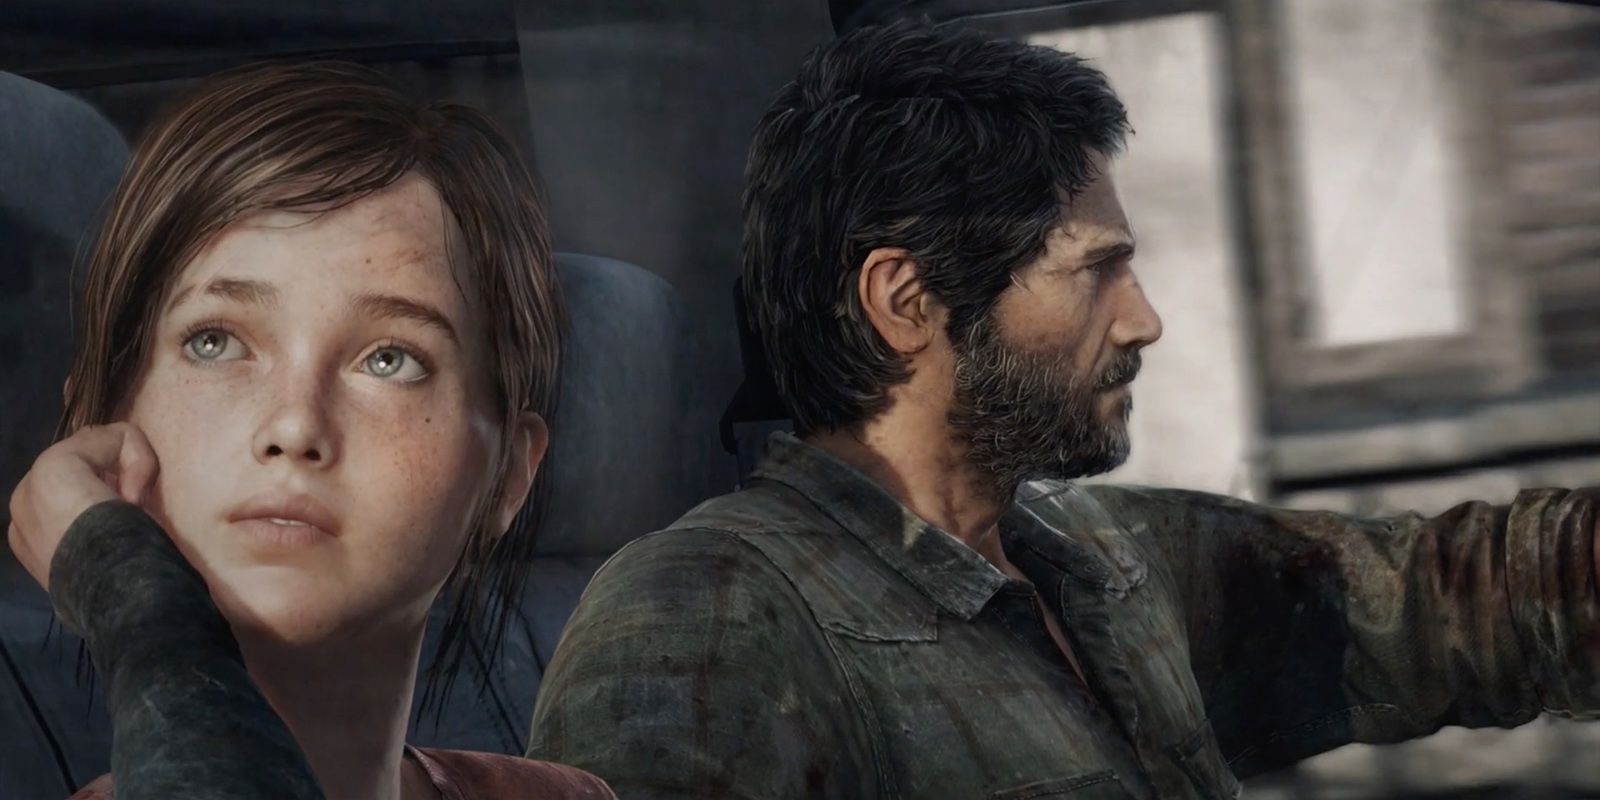 Last of Us Remake: 2022 Release Date Seemingly Revealed By Leaker